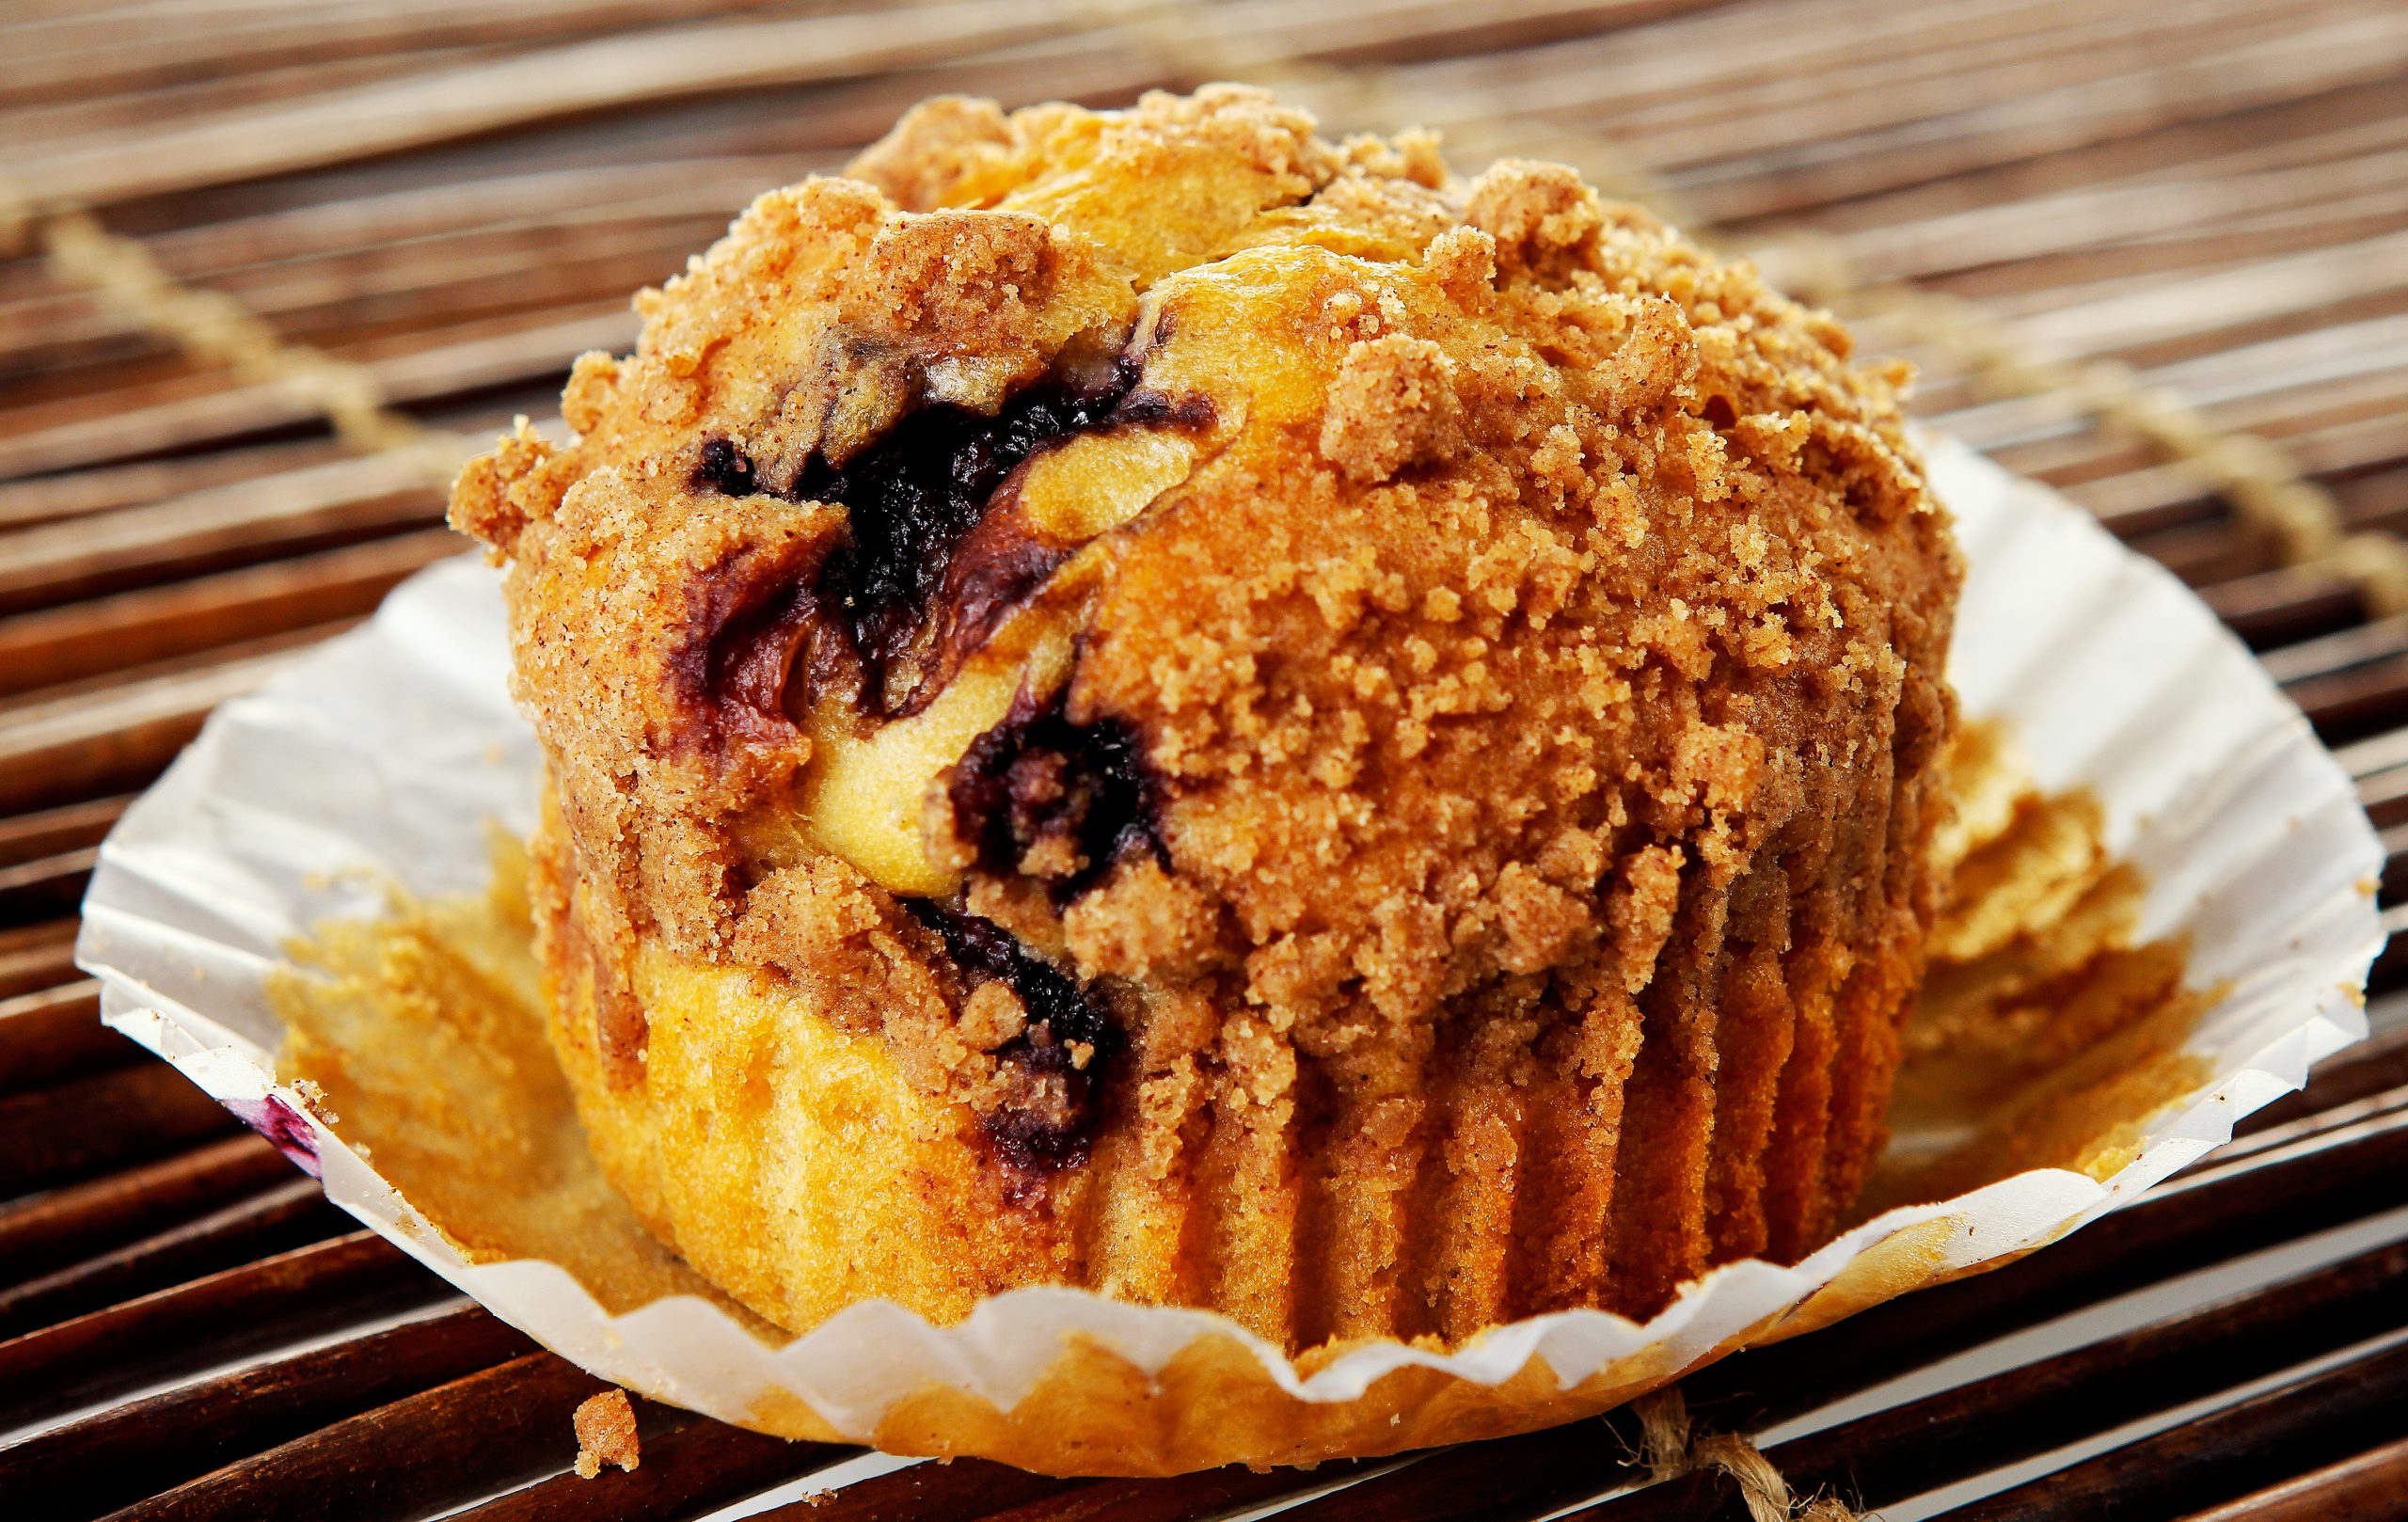 Crumbly Topped Blueberry Muffin in Wrapper on Woven Wooden Mat Food Picture